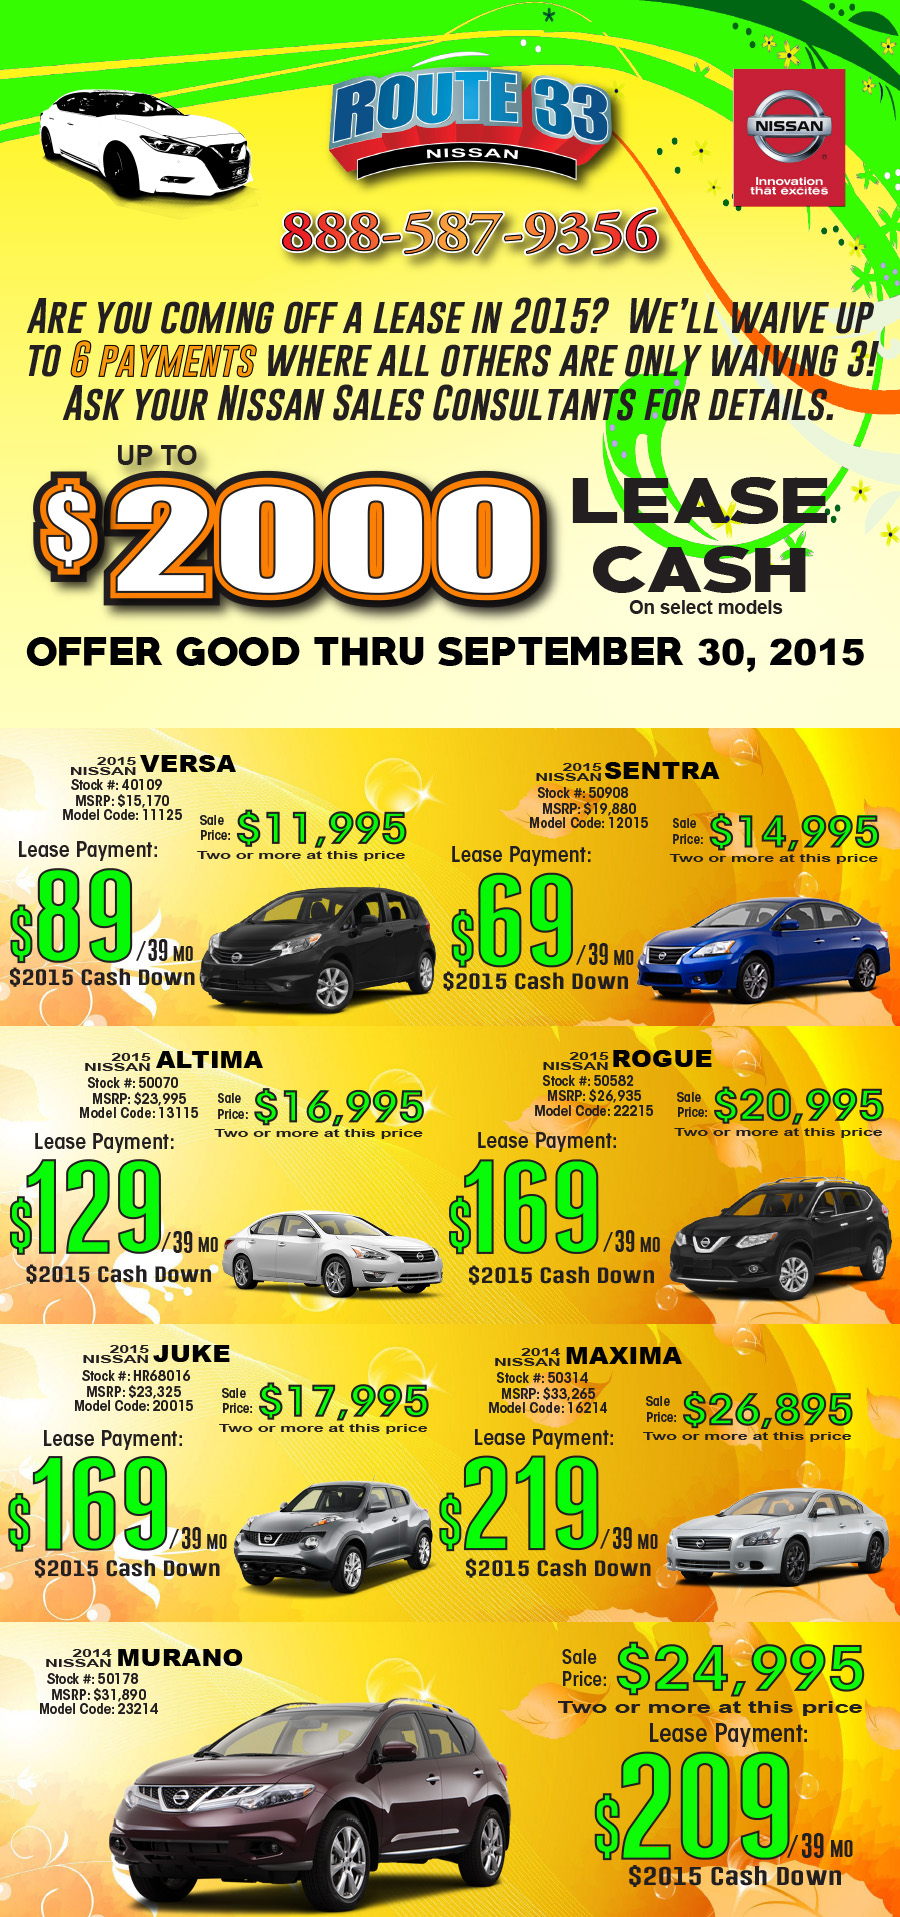 summer-lease-loyalty-deals-route-33-nissan